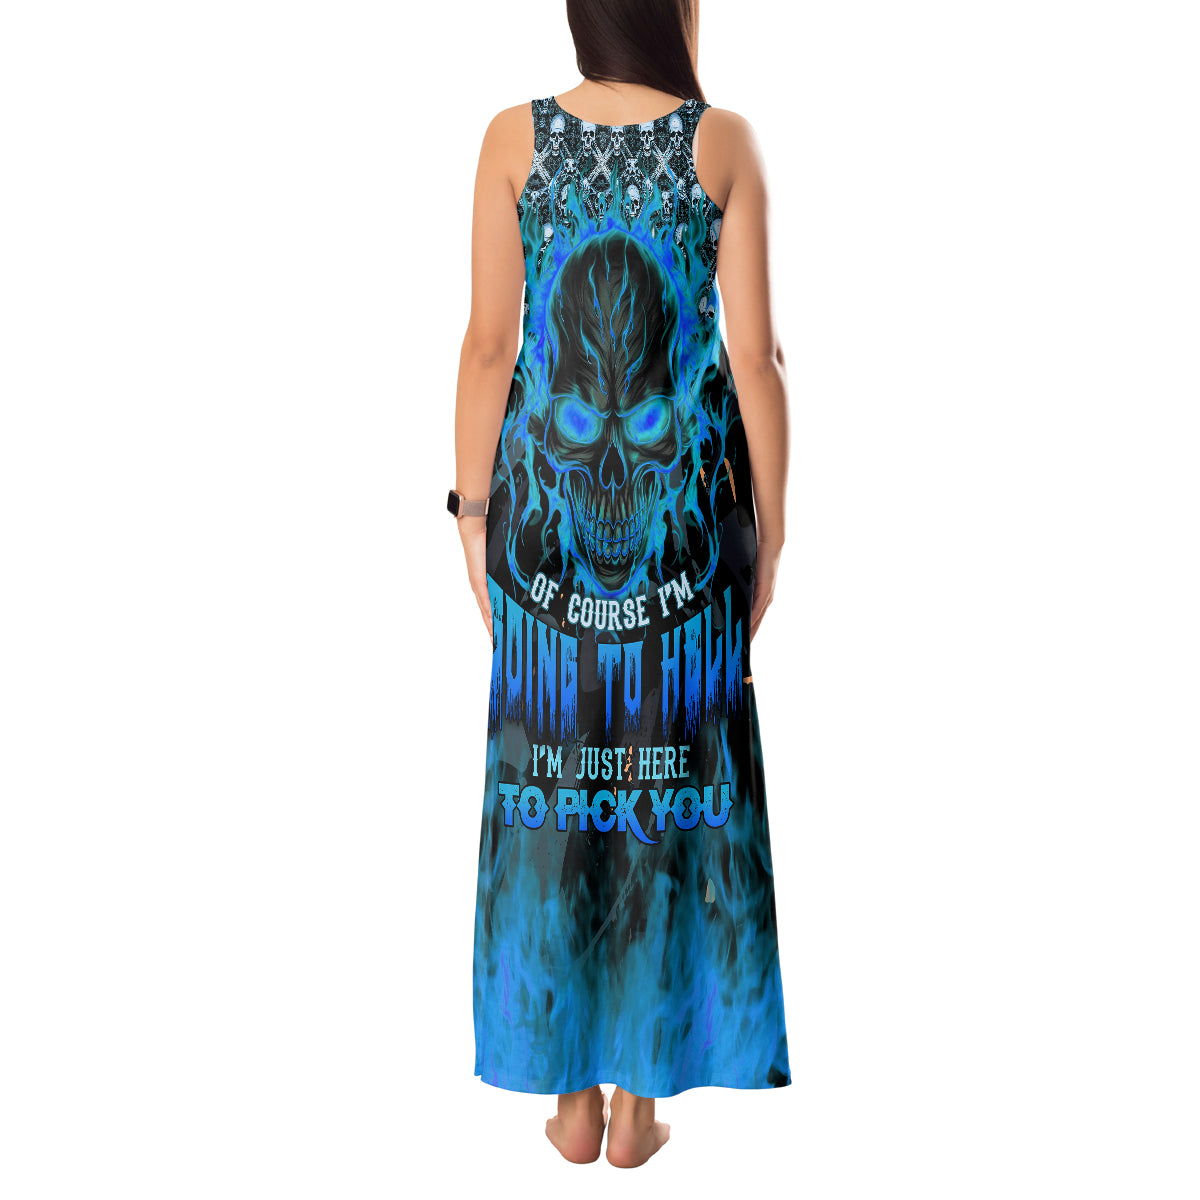 fire-skull-tank-maxi-dress-of-course-im-going-to-hell-im-just-here-to-pick-you-up